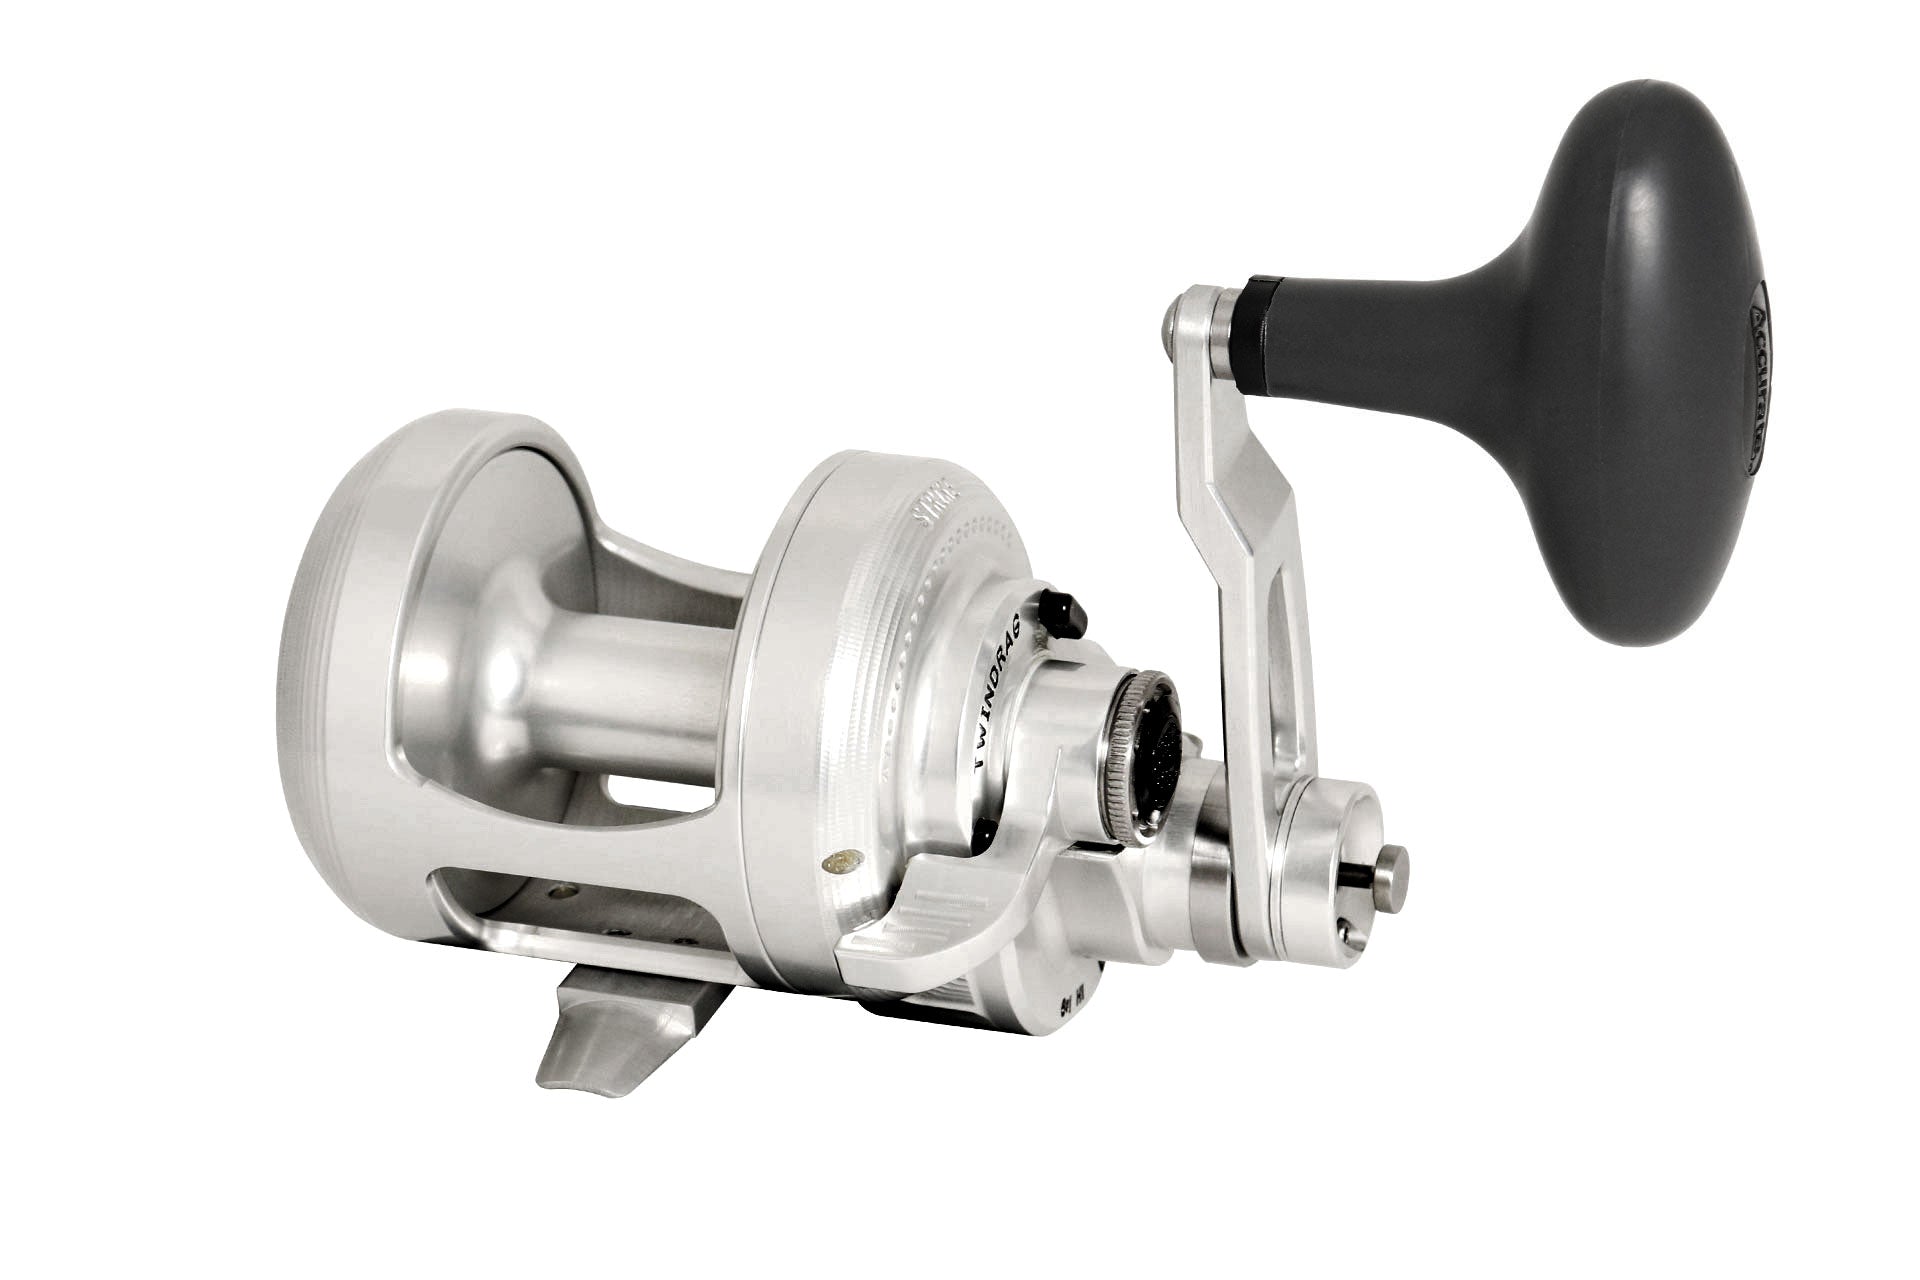 ACCURATE DAUNTLESS TWO SPEED REELS - Fisherman's Outfitter